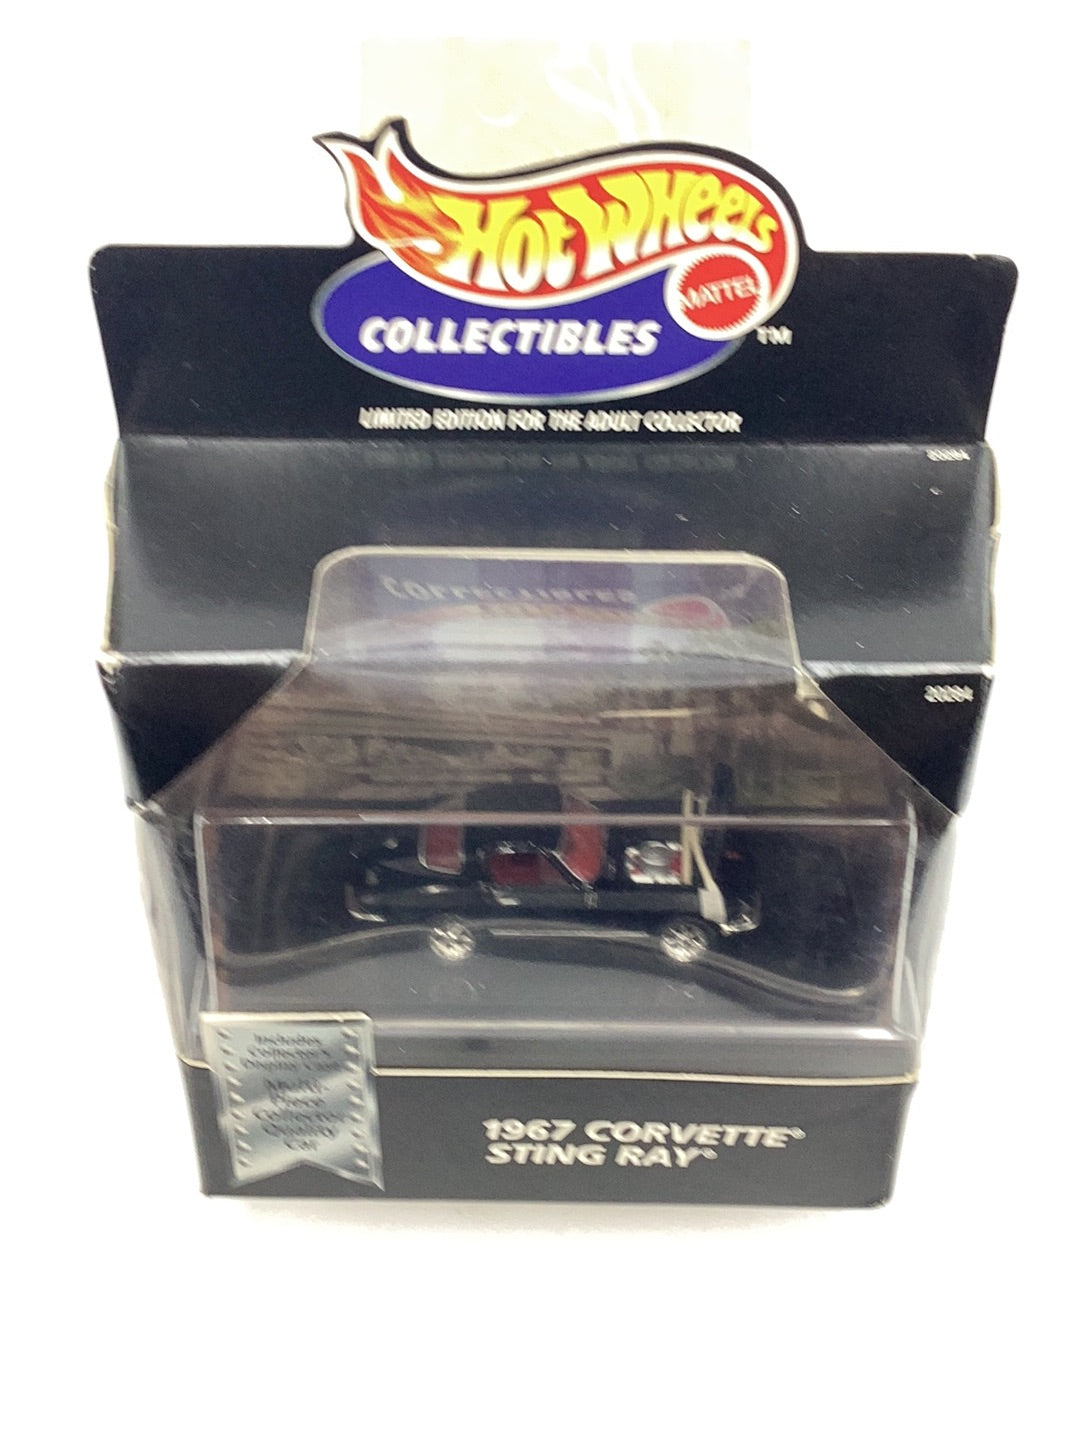 Hot Wheels Collectibles 1967 Corvette Sting Ray